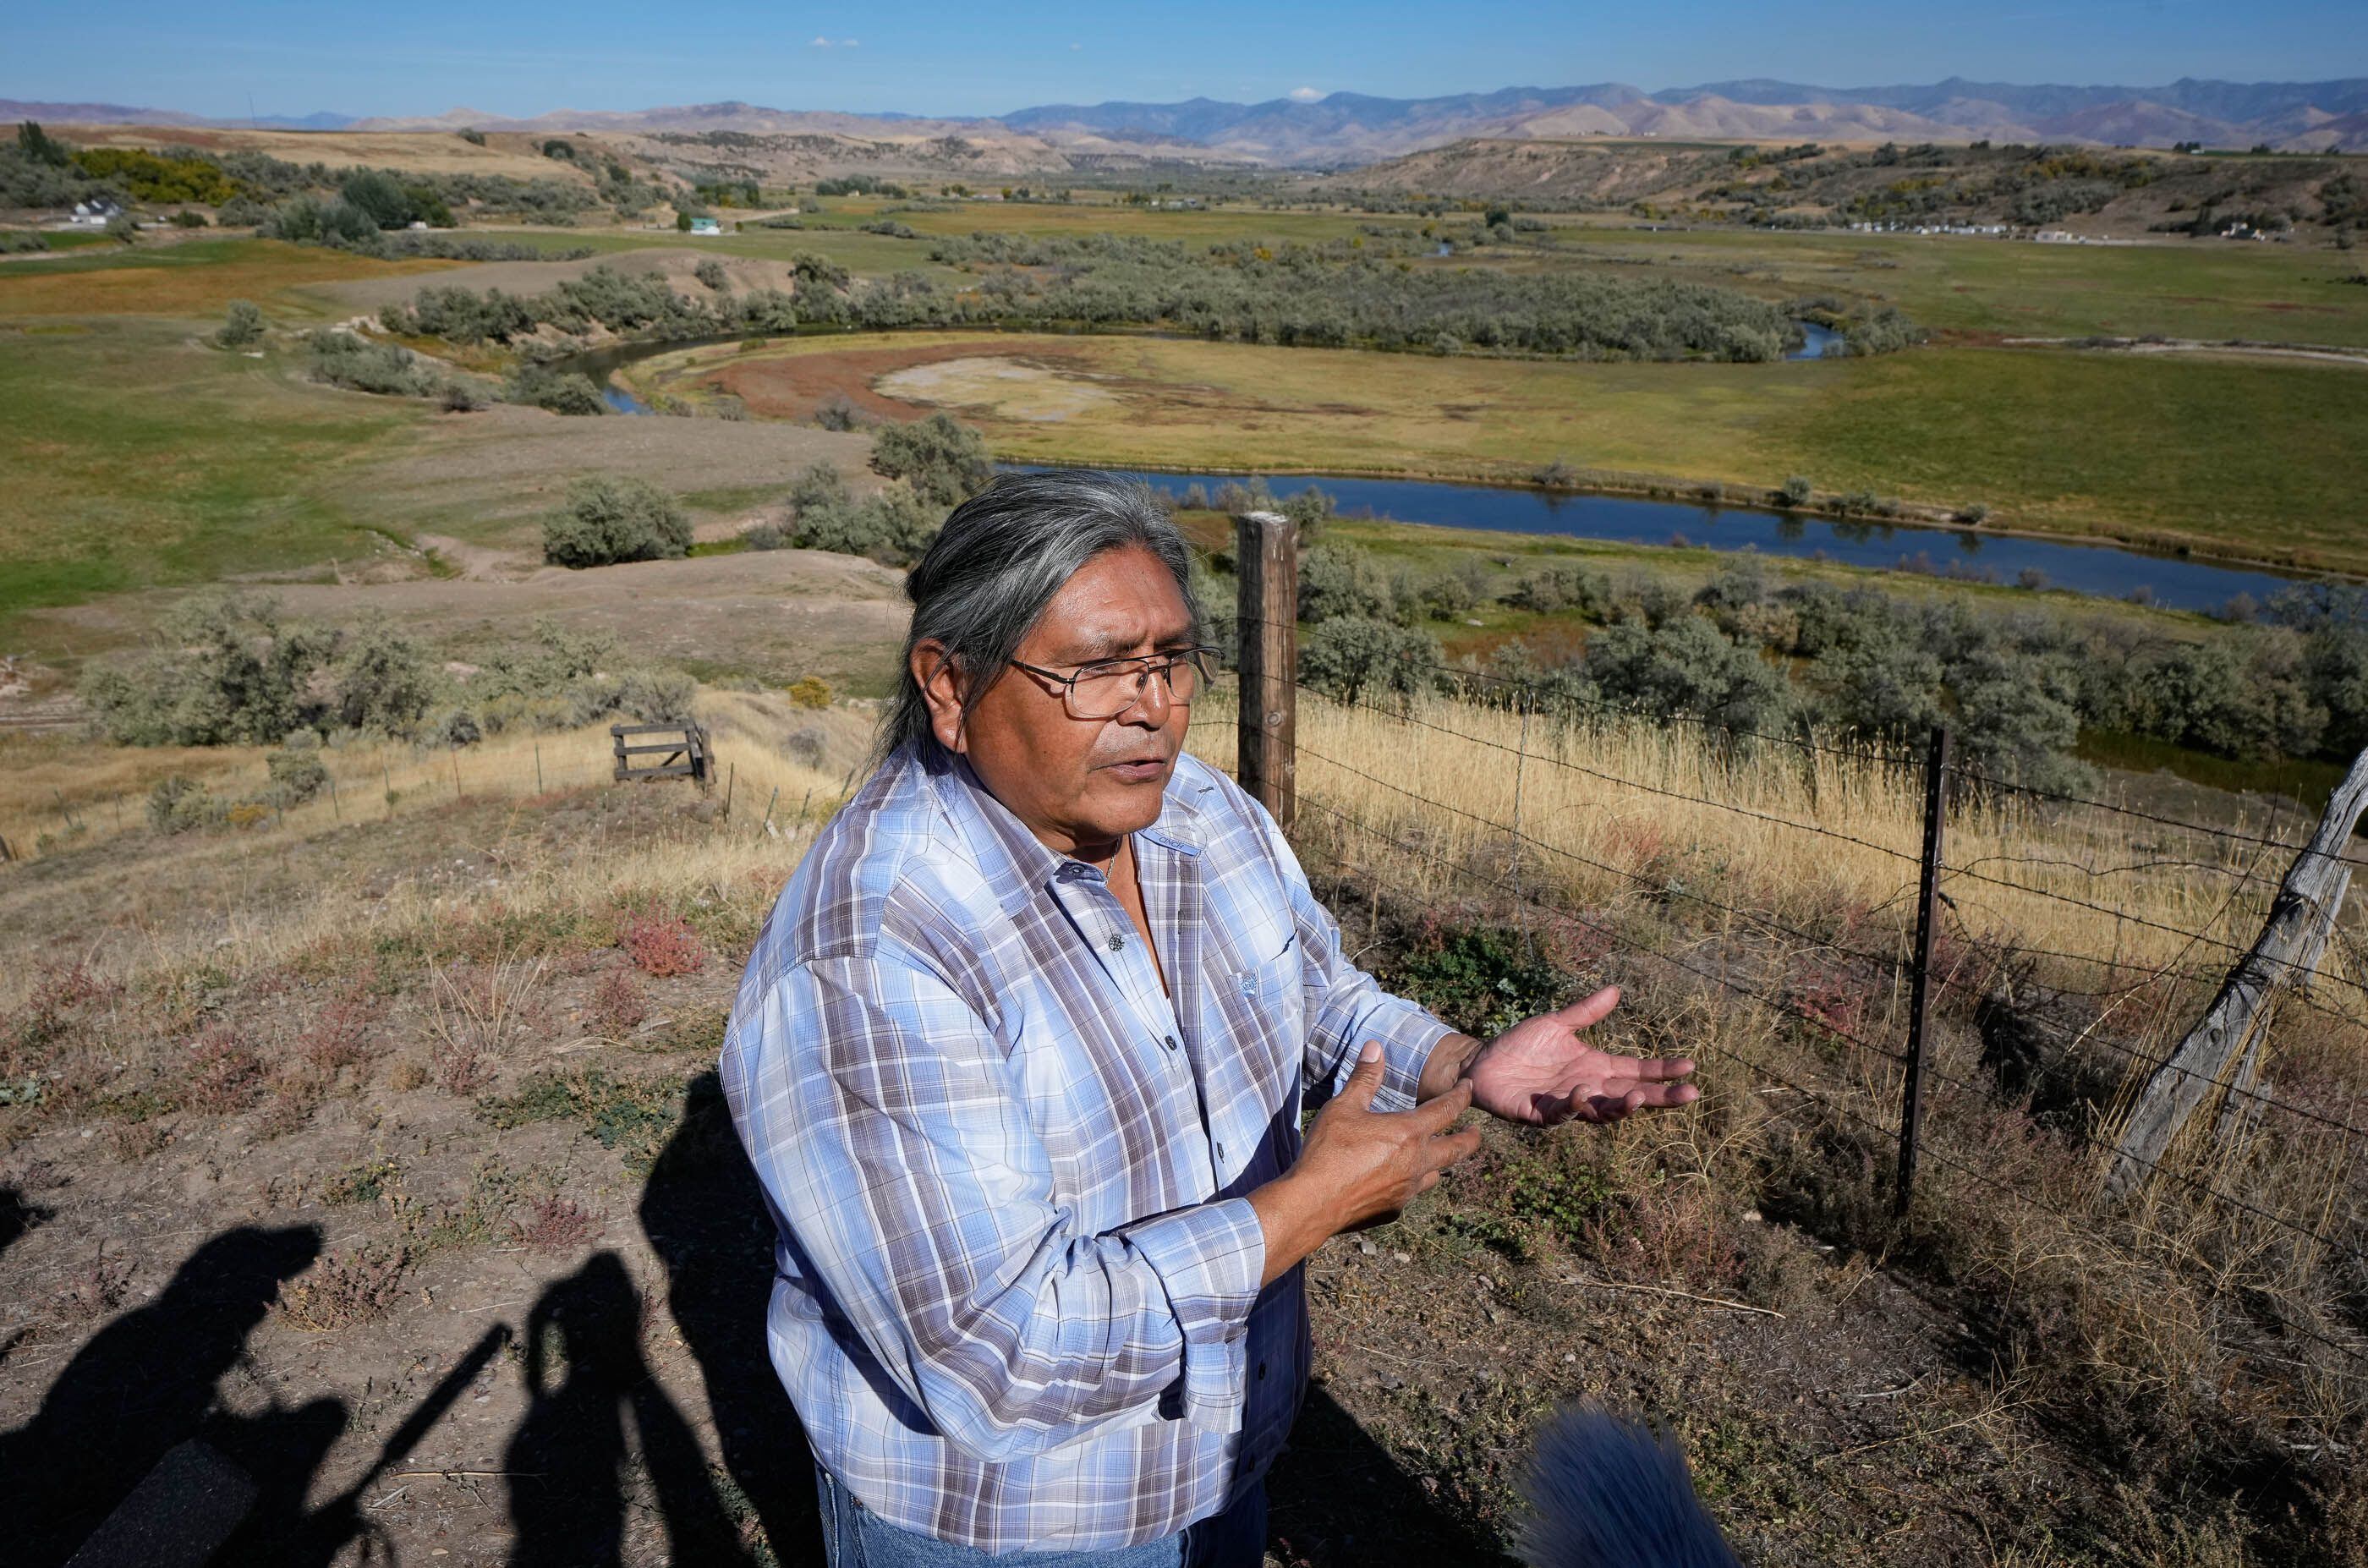 (Francisco Kjolseth | The Salt Lake Tribune) Rios Pacheco, an interpreter of Northwestern Shoshone culture, history, arts and life discusses plans for the Bear River Massacre site behind him on Thursday, Oct. 6, 2022, acquired by the Shoshone to turn into a place of healing. The Shoshone experienced the largest slaughter of Indigenous people in the nation’s history there.